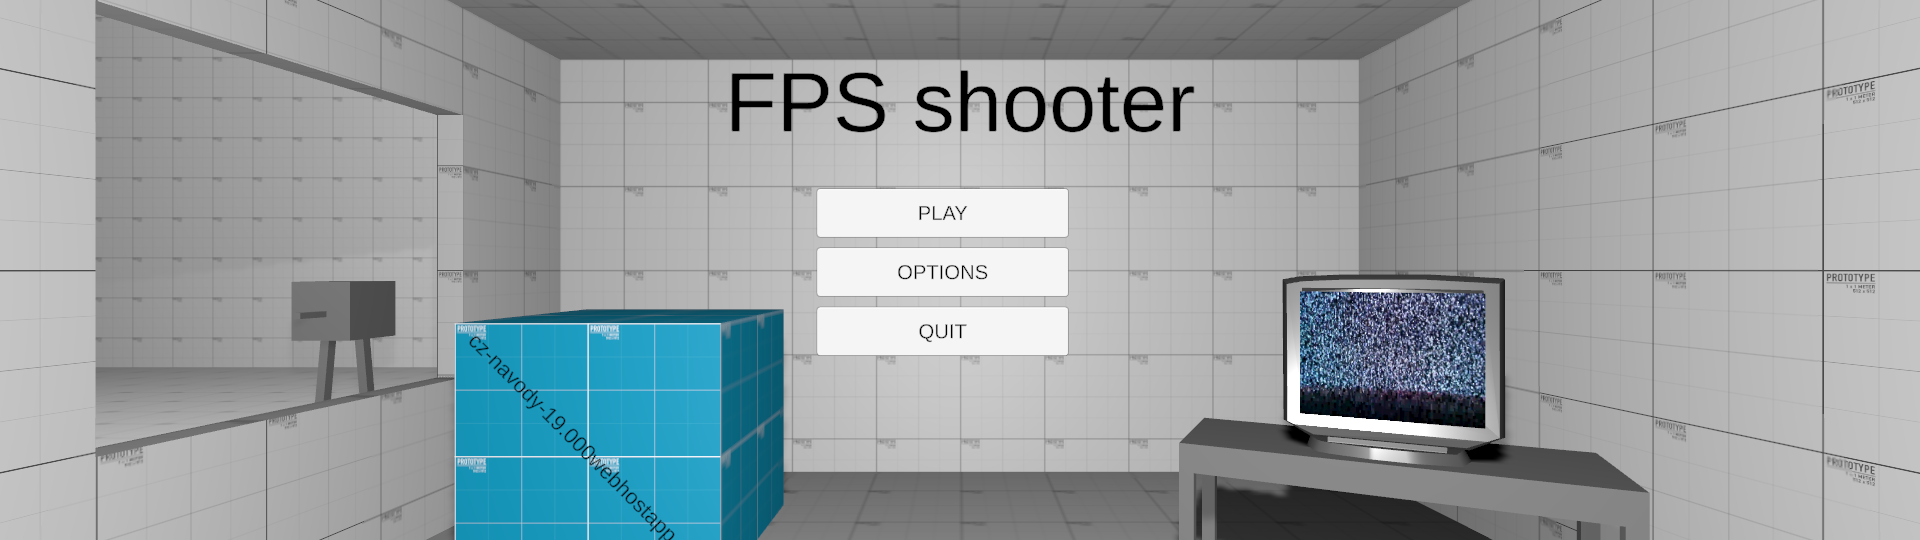 FPS shooter